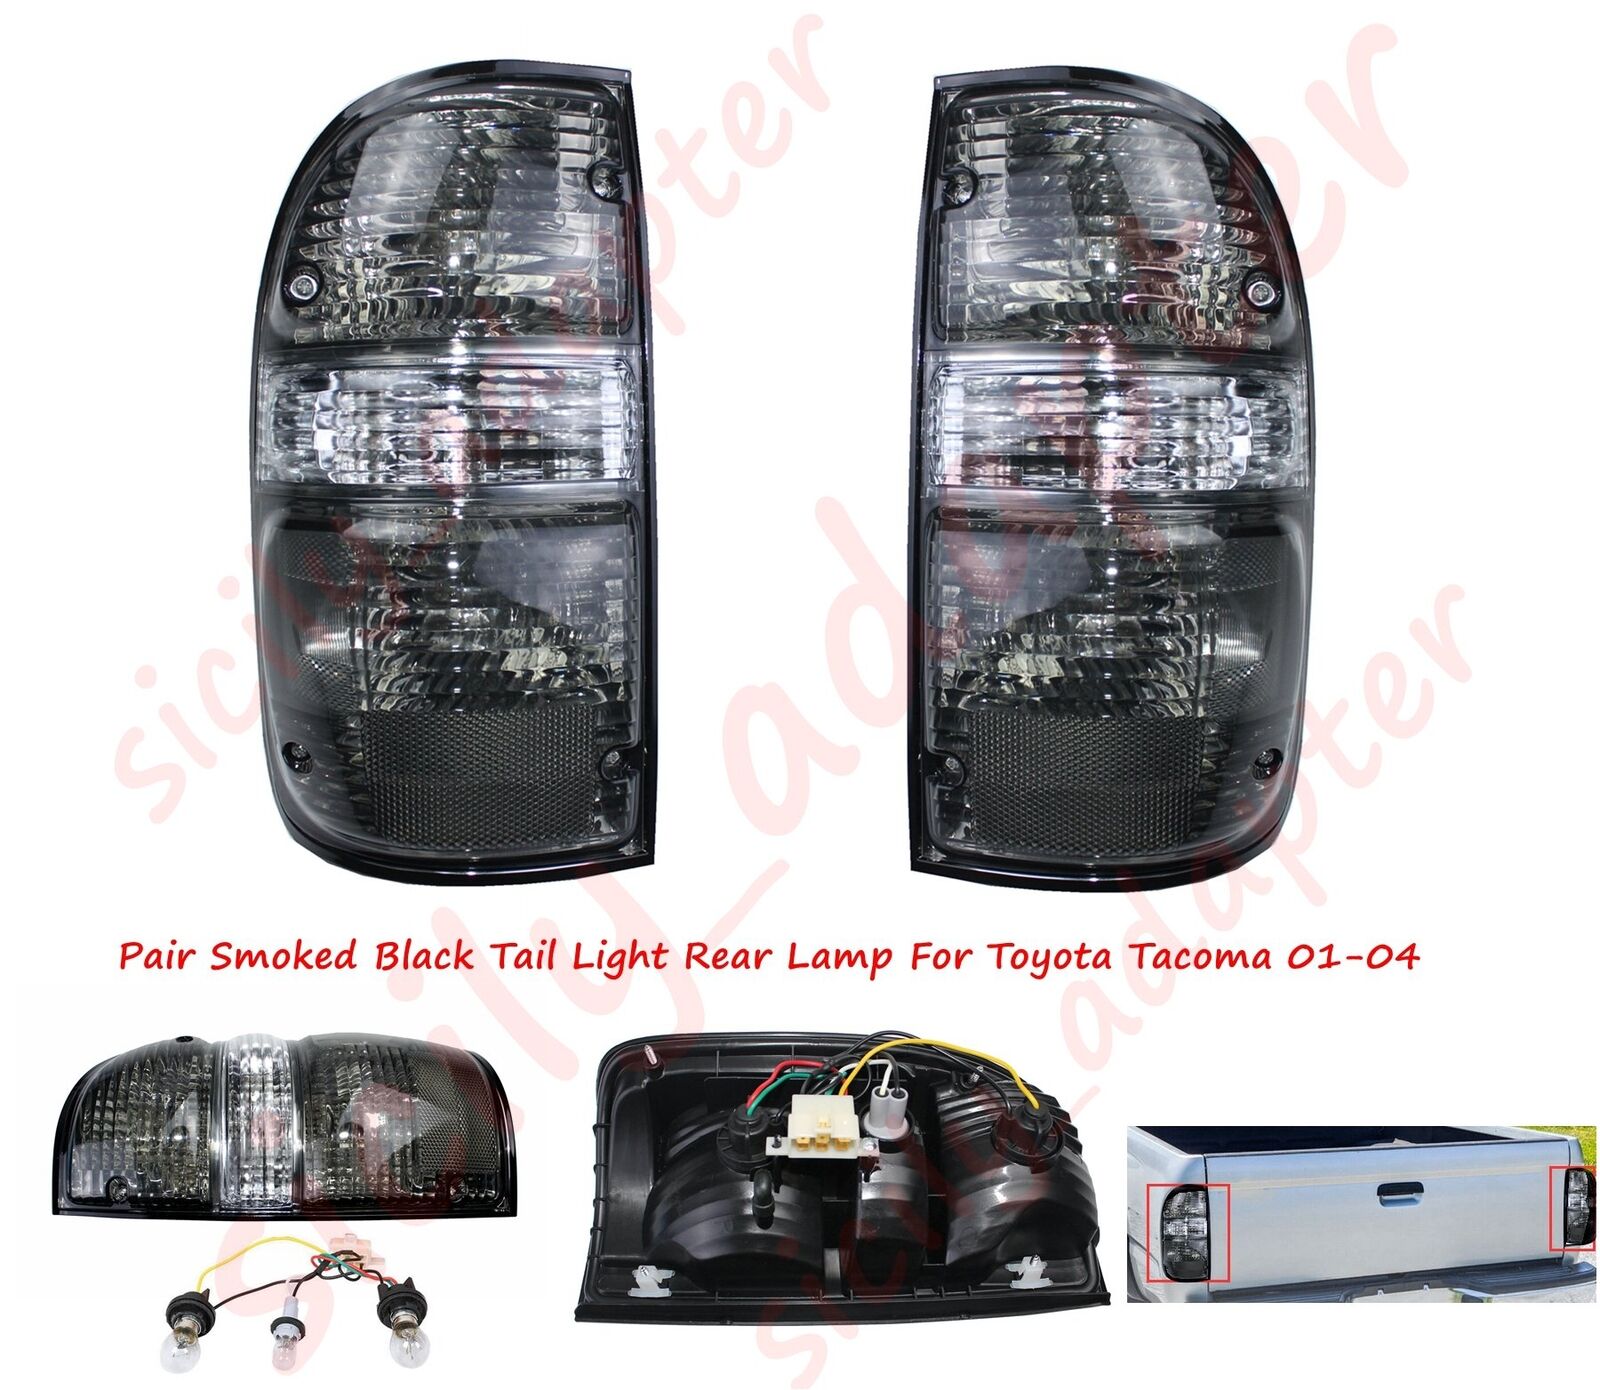 Black Smoked Pair Tail Light Rear Lamp For Toyota Tacoma 01-04 Pickup W/ Bulb US